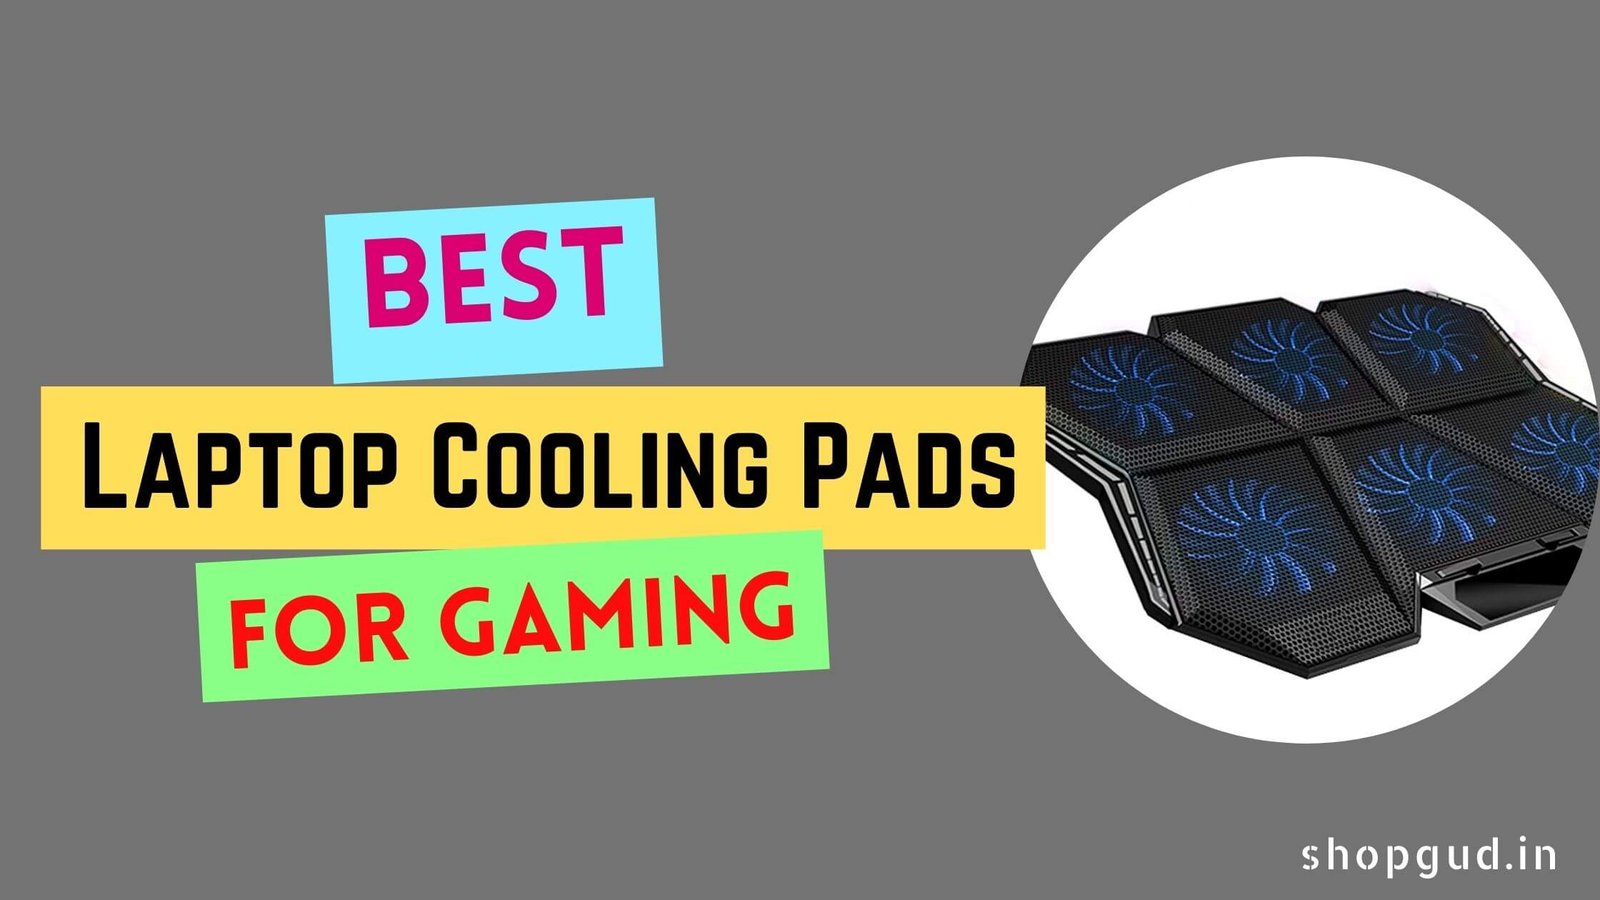 Best Laptop Cooling Pads for Gaming